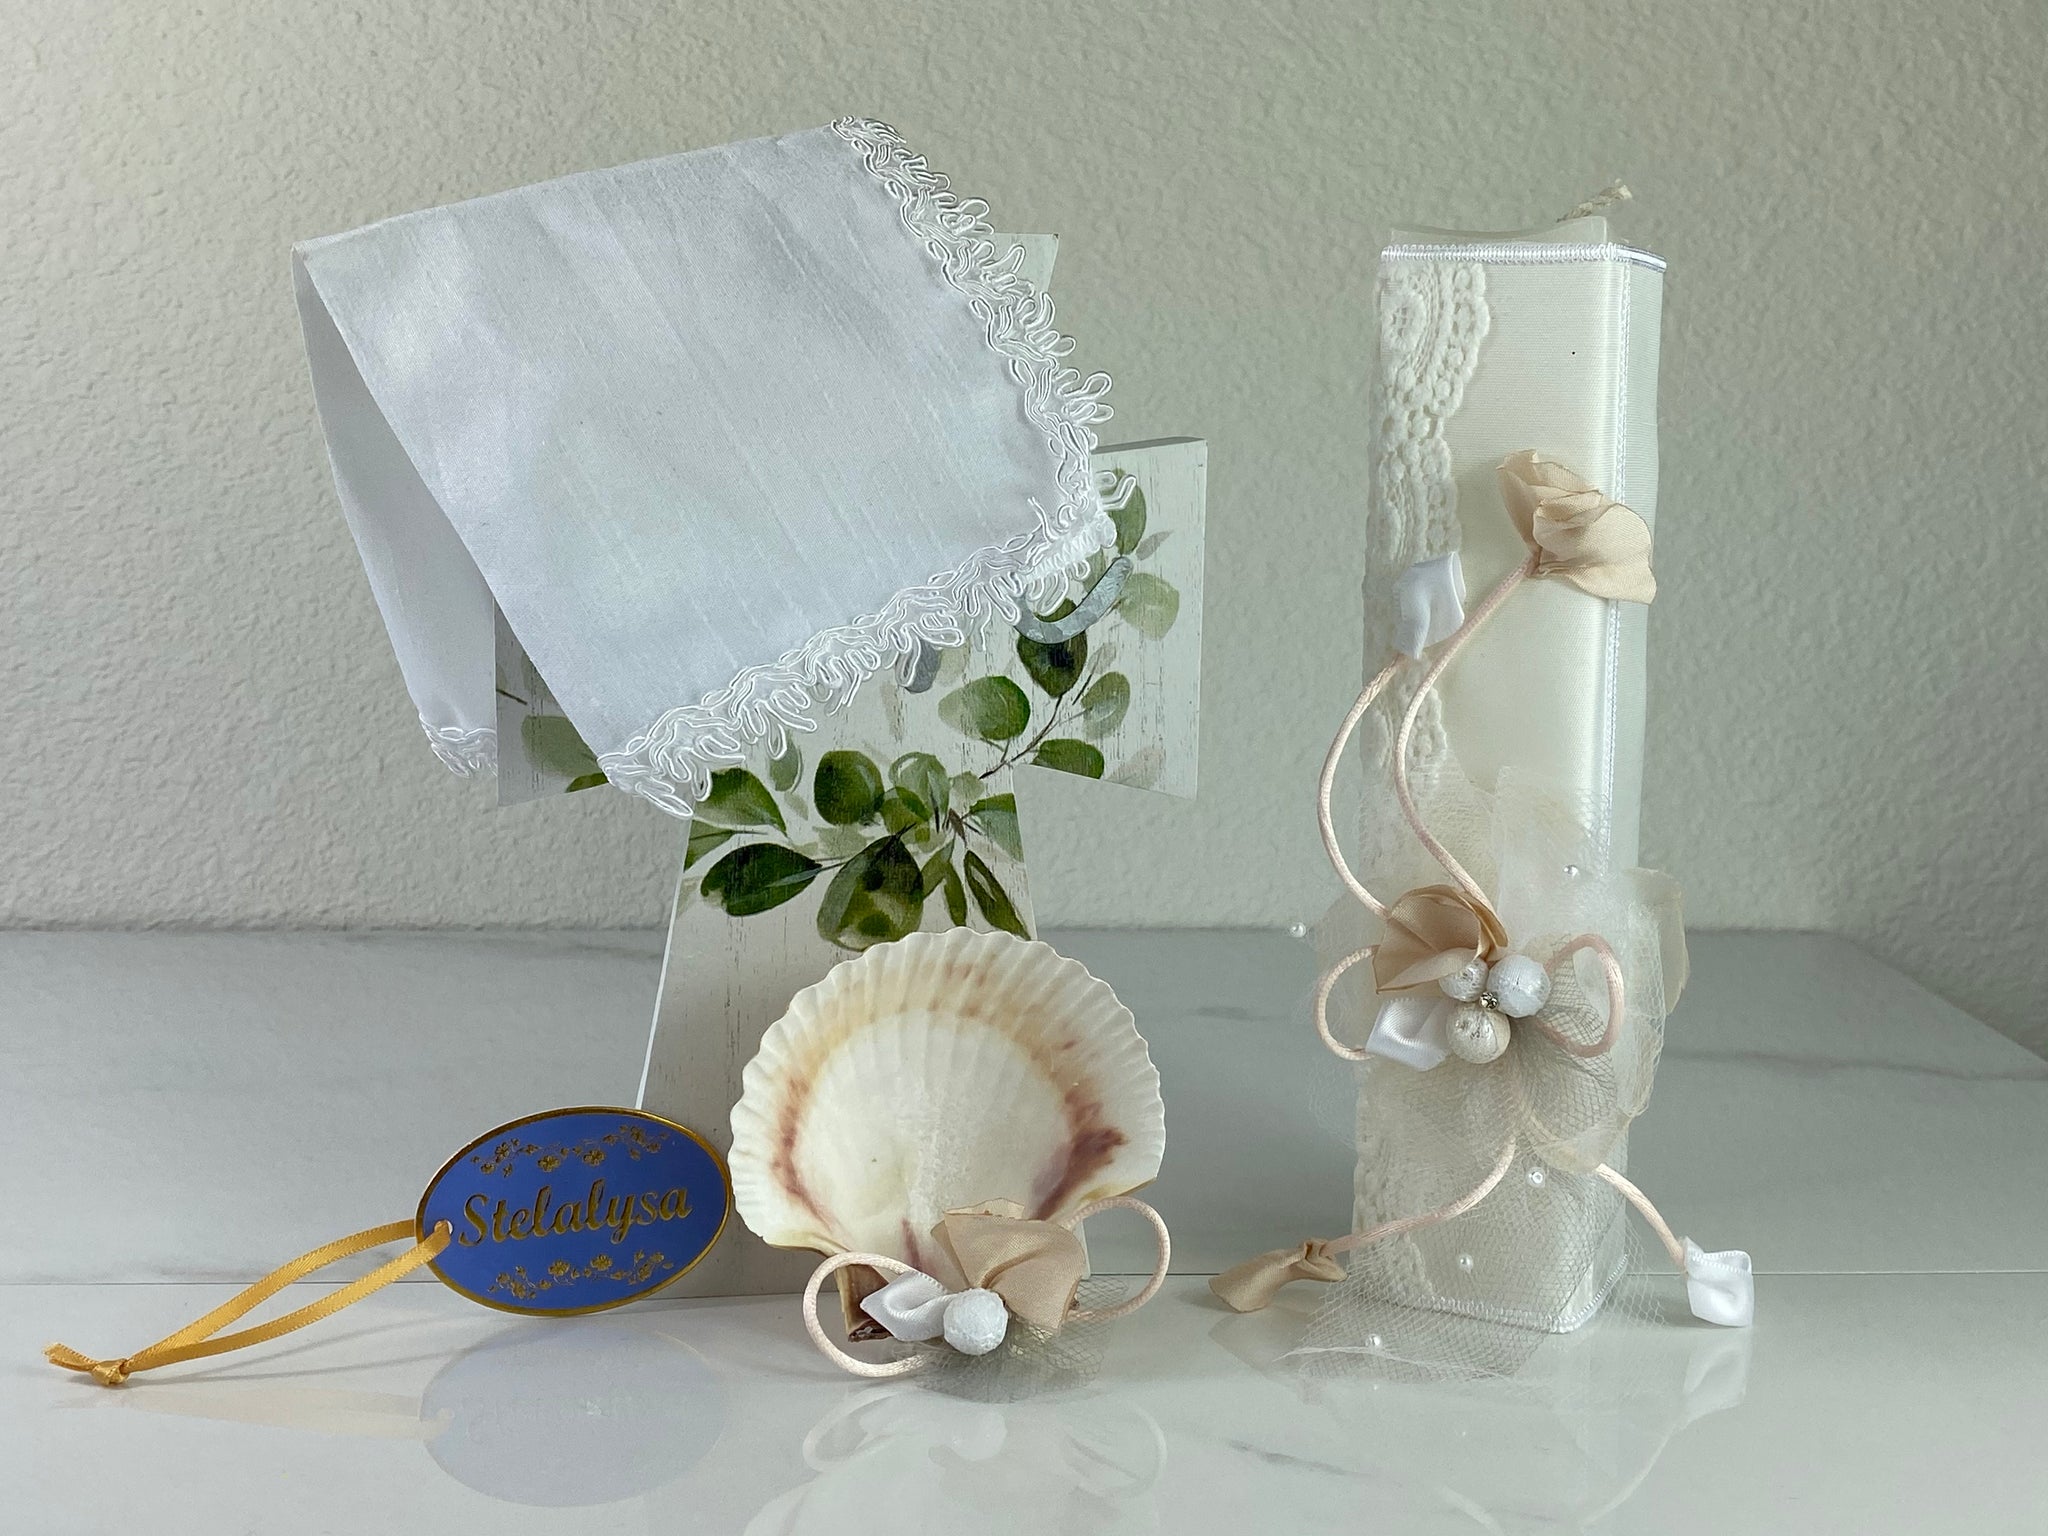 These one-of-a-kind Candle set is handmade and ivory in color.  This candle has an elegant look.   It is uniquely decorated with crystals, lace, tulle, and ribbons making it a gorgeous keepsake.   This candle is rectangle in shape.    To match, the Shell is put together piece by piece to compliment the Candle and Handkerchief.  The Handkerchief is made of satin and embroidered lace to match the Shell and Candle beautifully.  